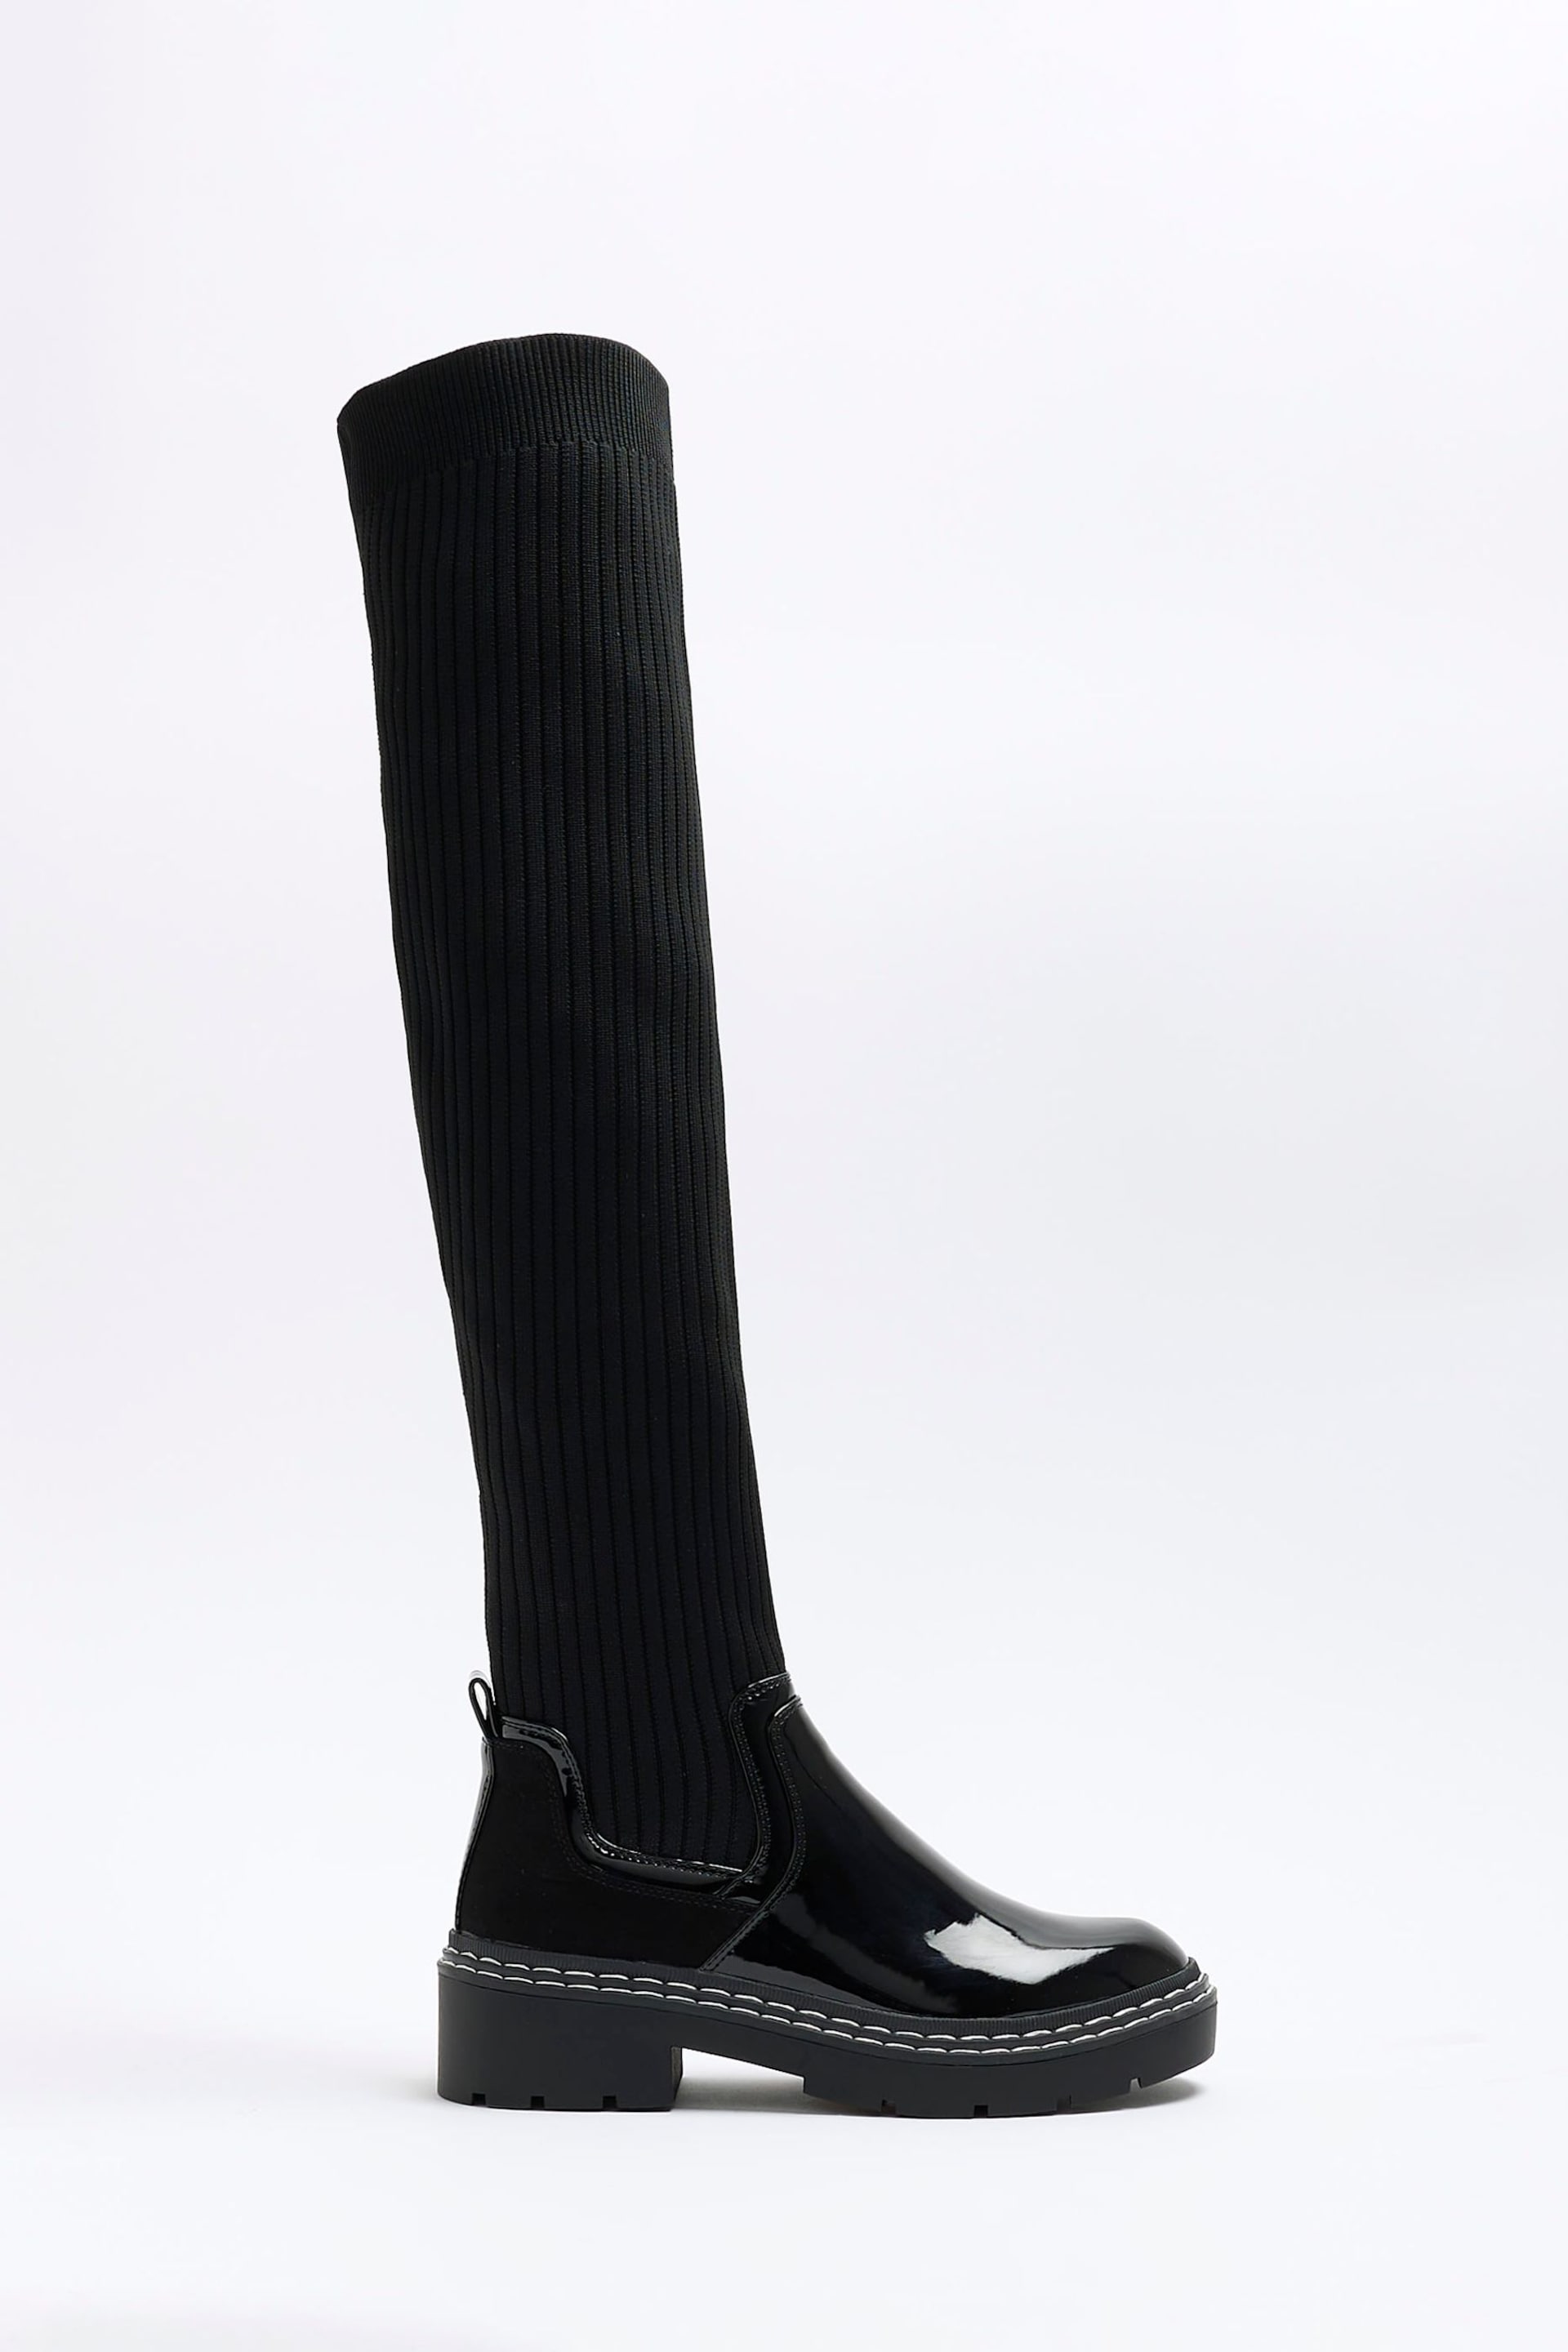 River Island Black Knit High Leg Boots - Image 2 of 5